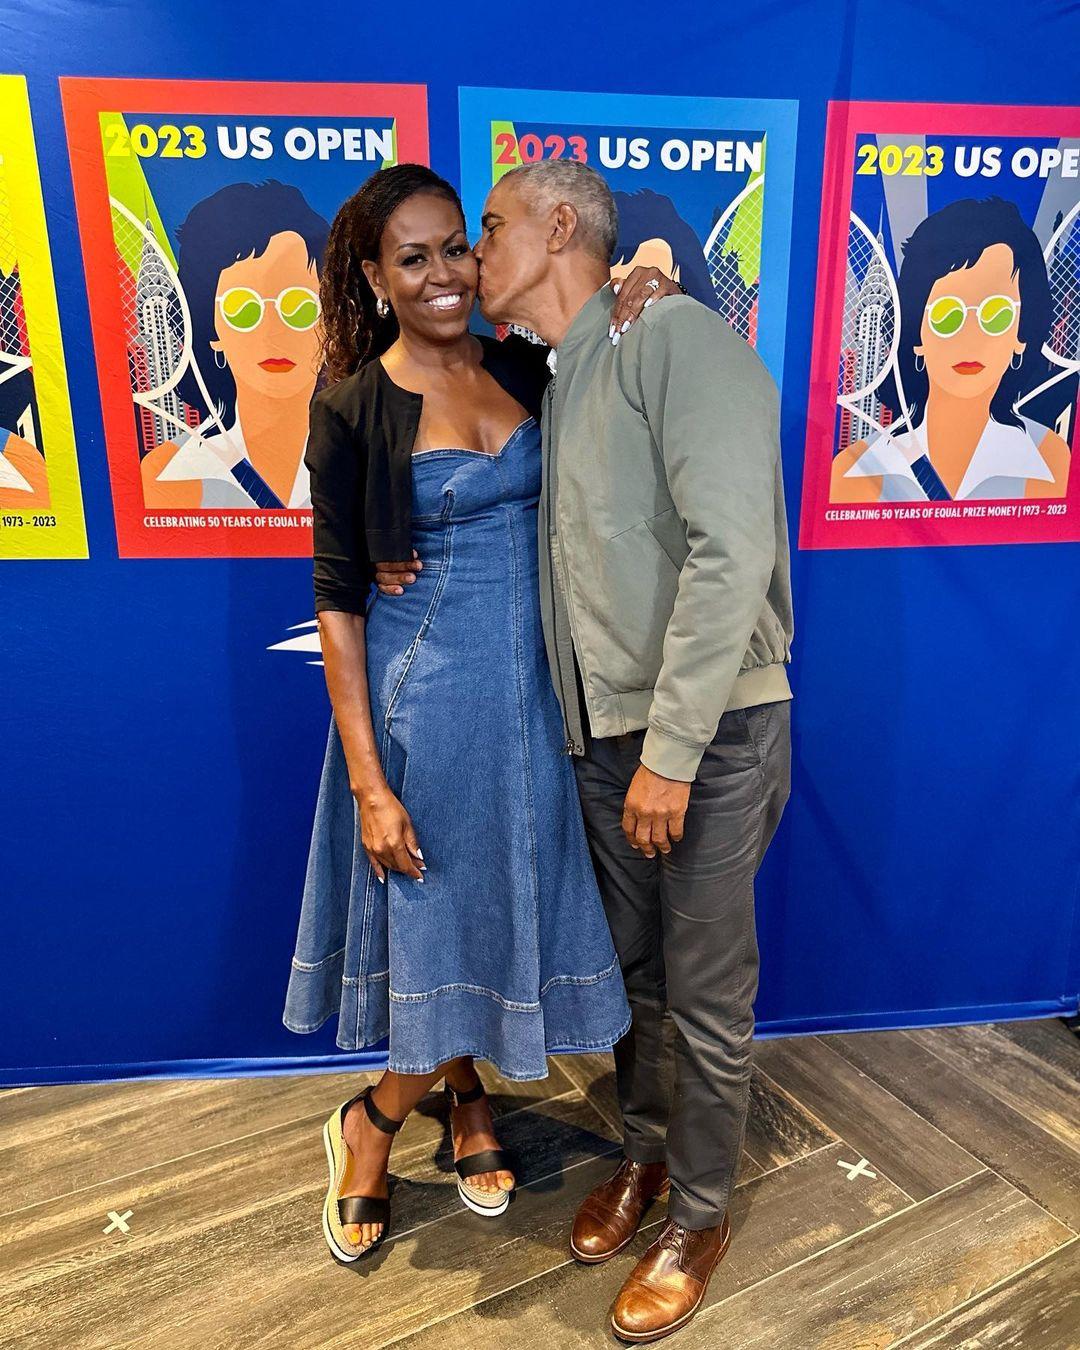 Barack and Michelle Obama enjoy date night at US Open